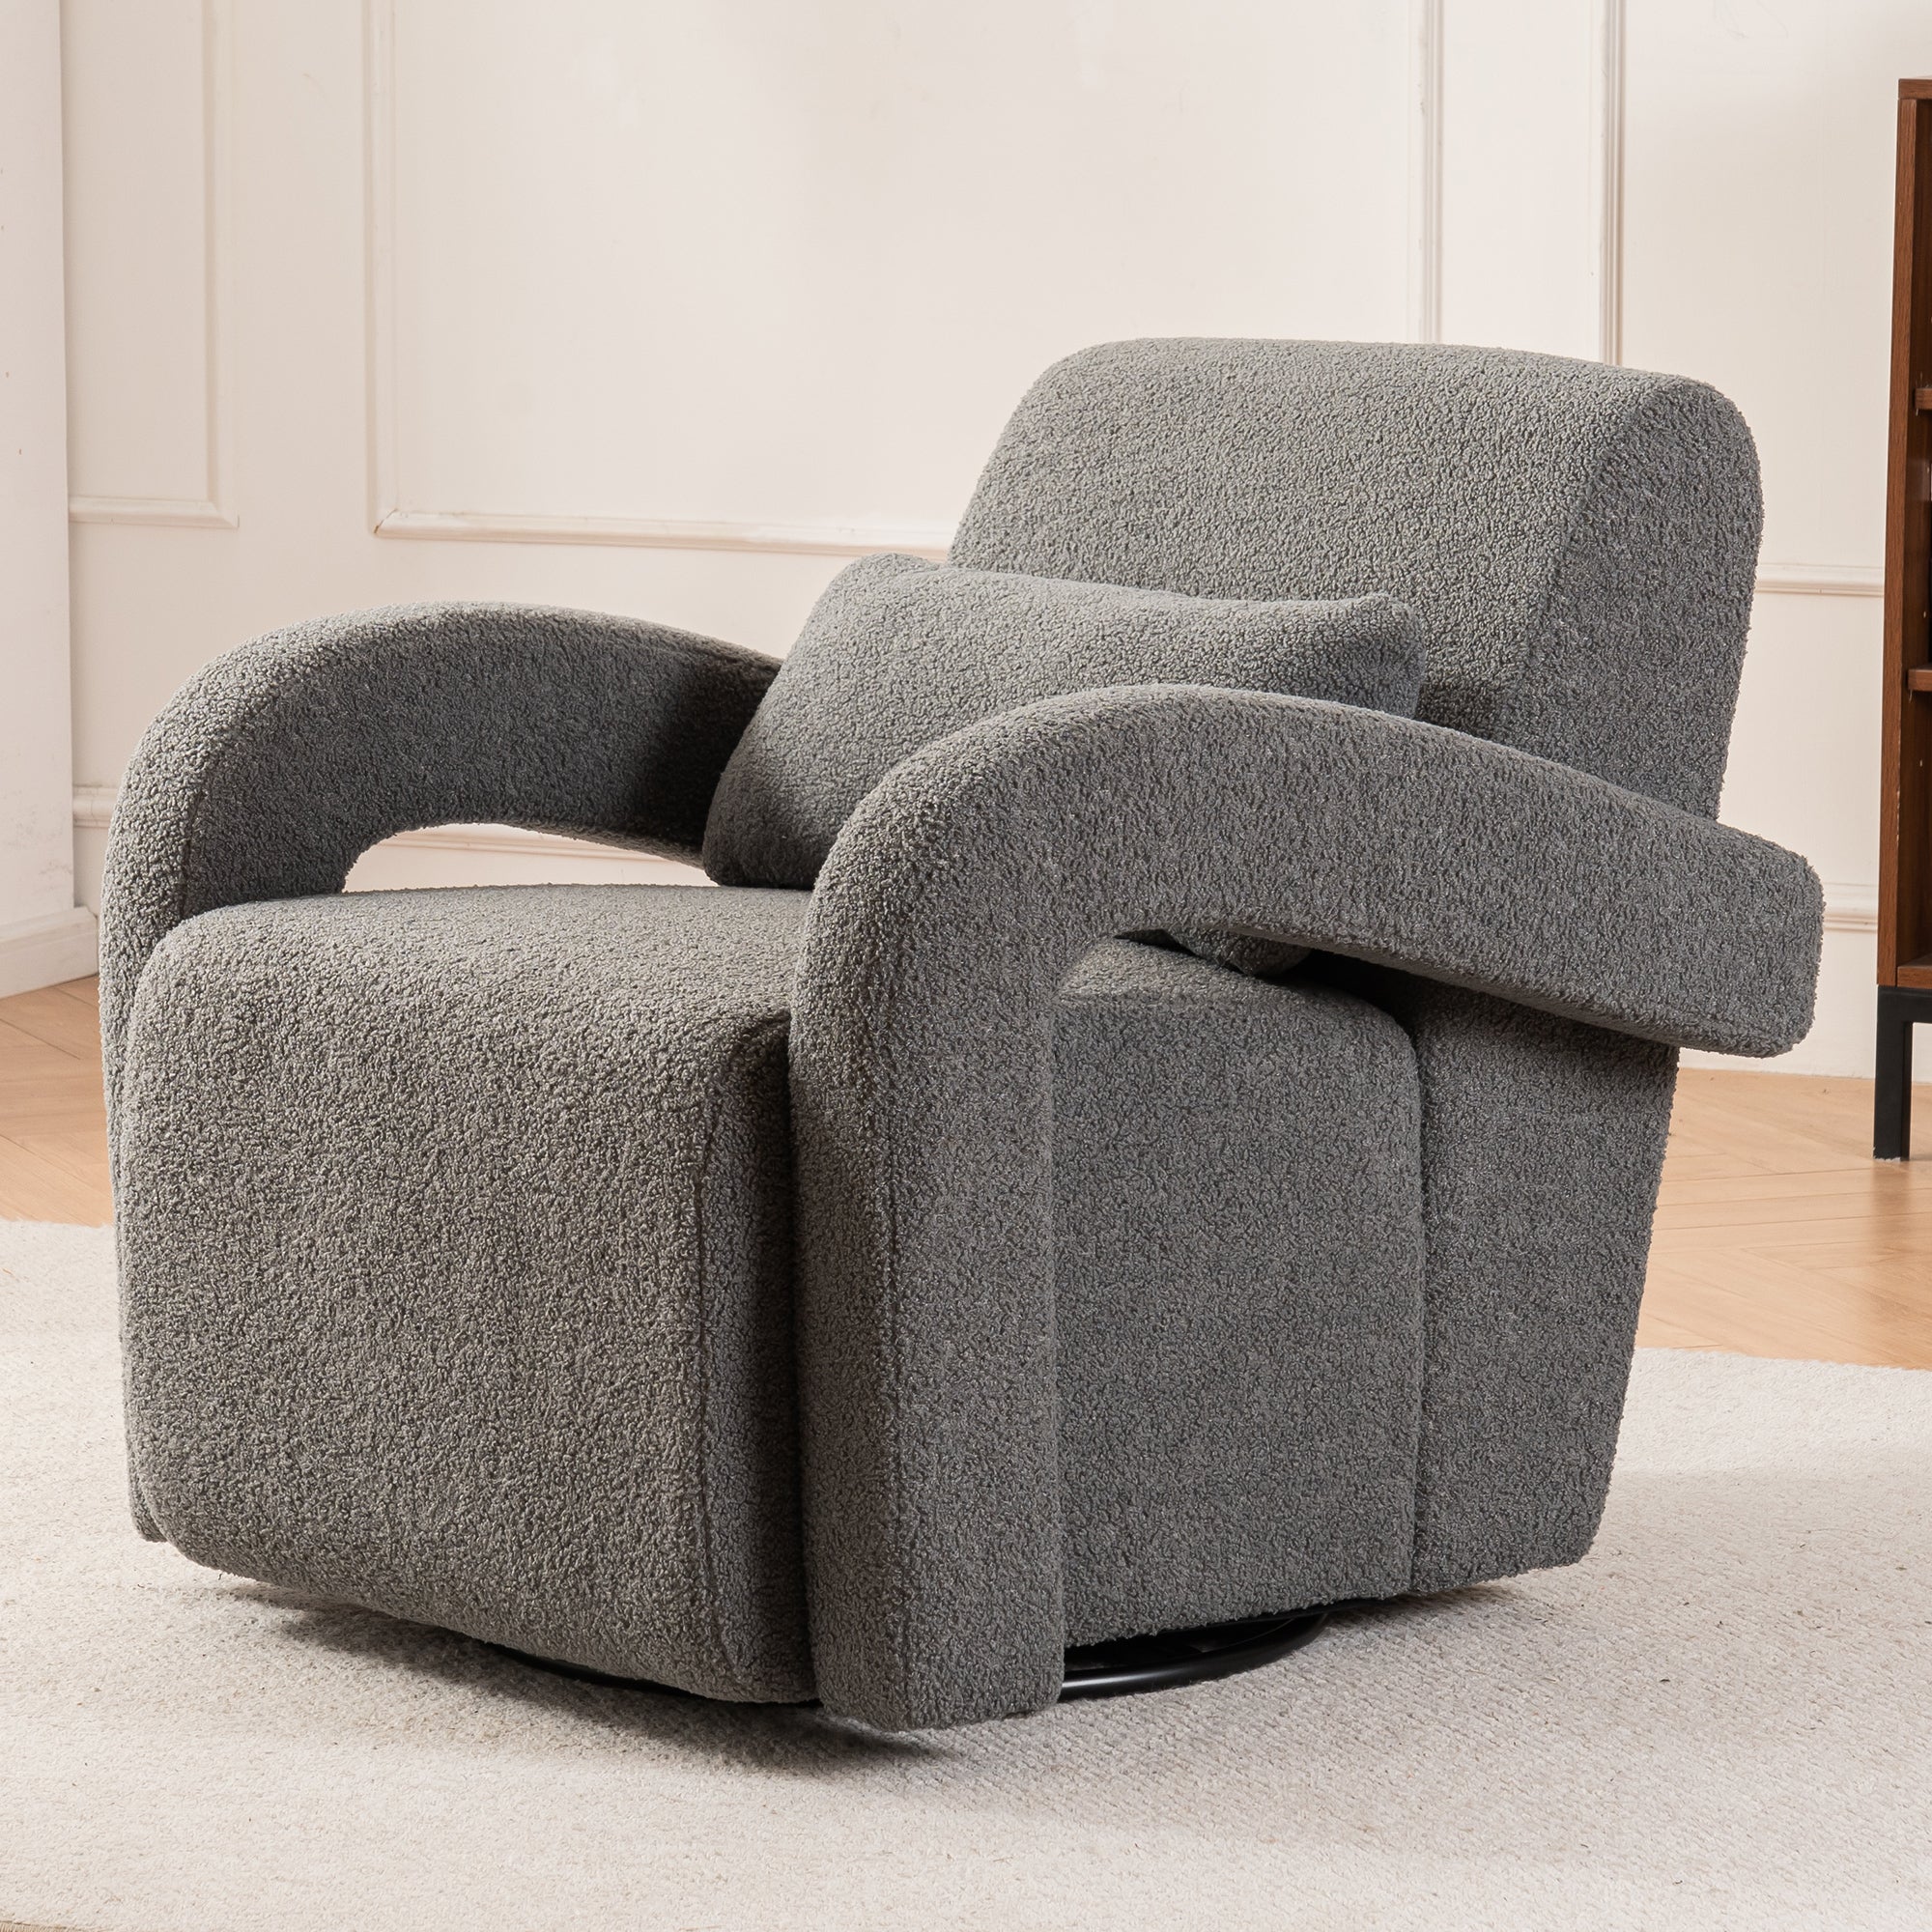 🆓🚛 Cozy Teddy Fabric Armchair - Modern Sturdy Lounge Chair With Curved Arms and Thick Cushioning for Plush Comfort, Dark Gray